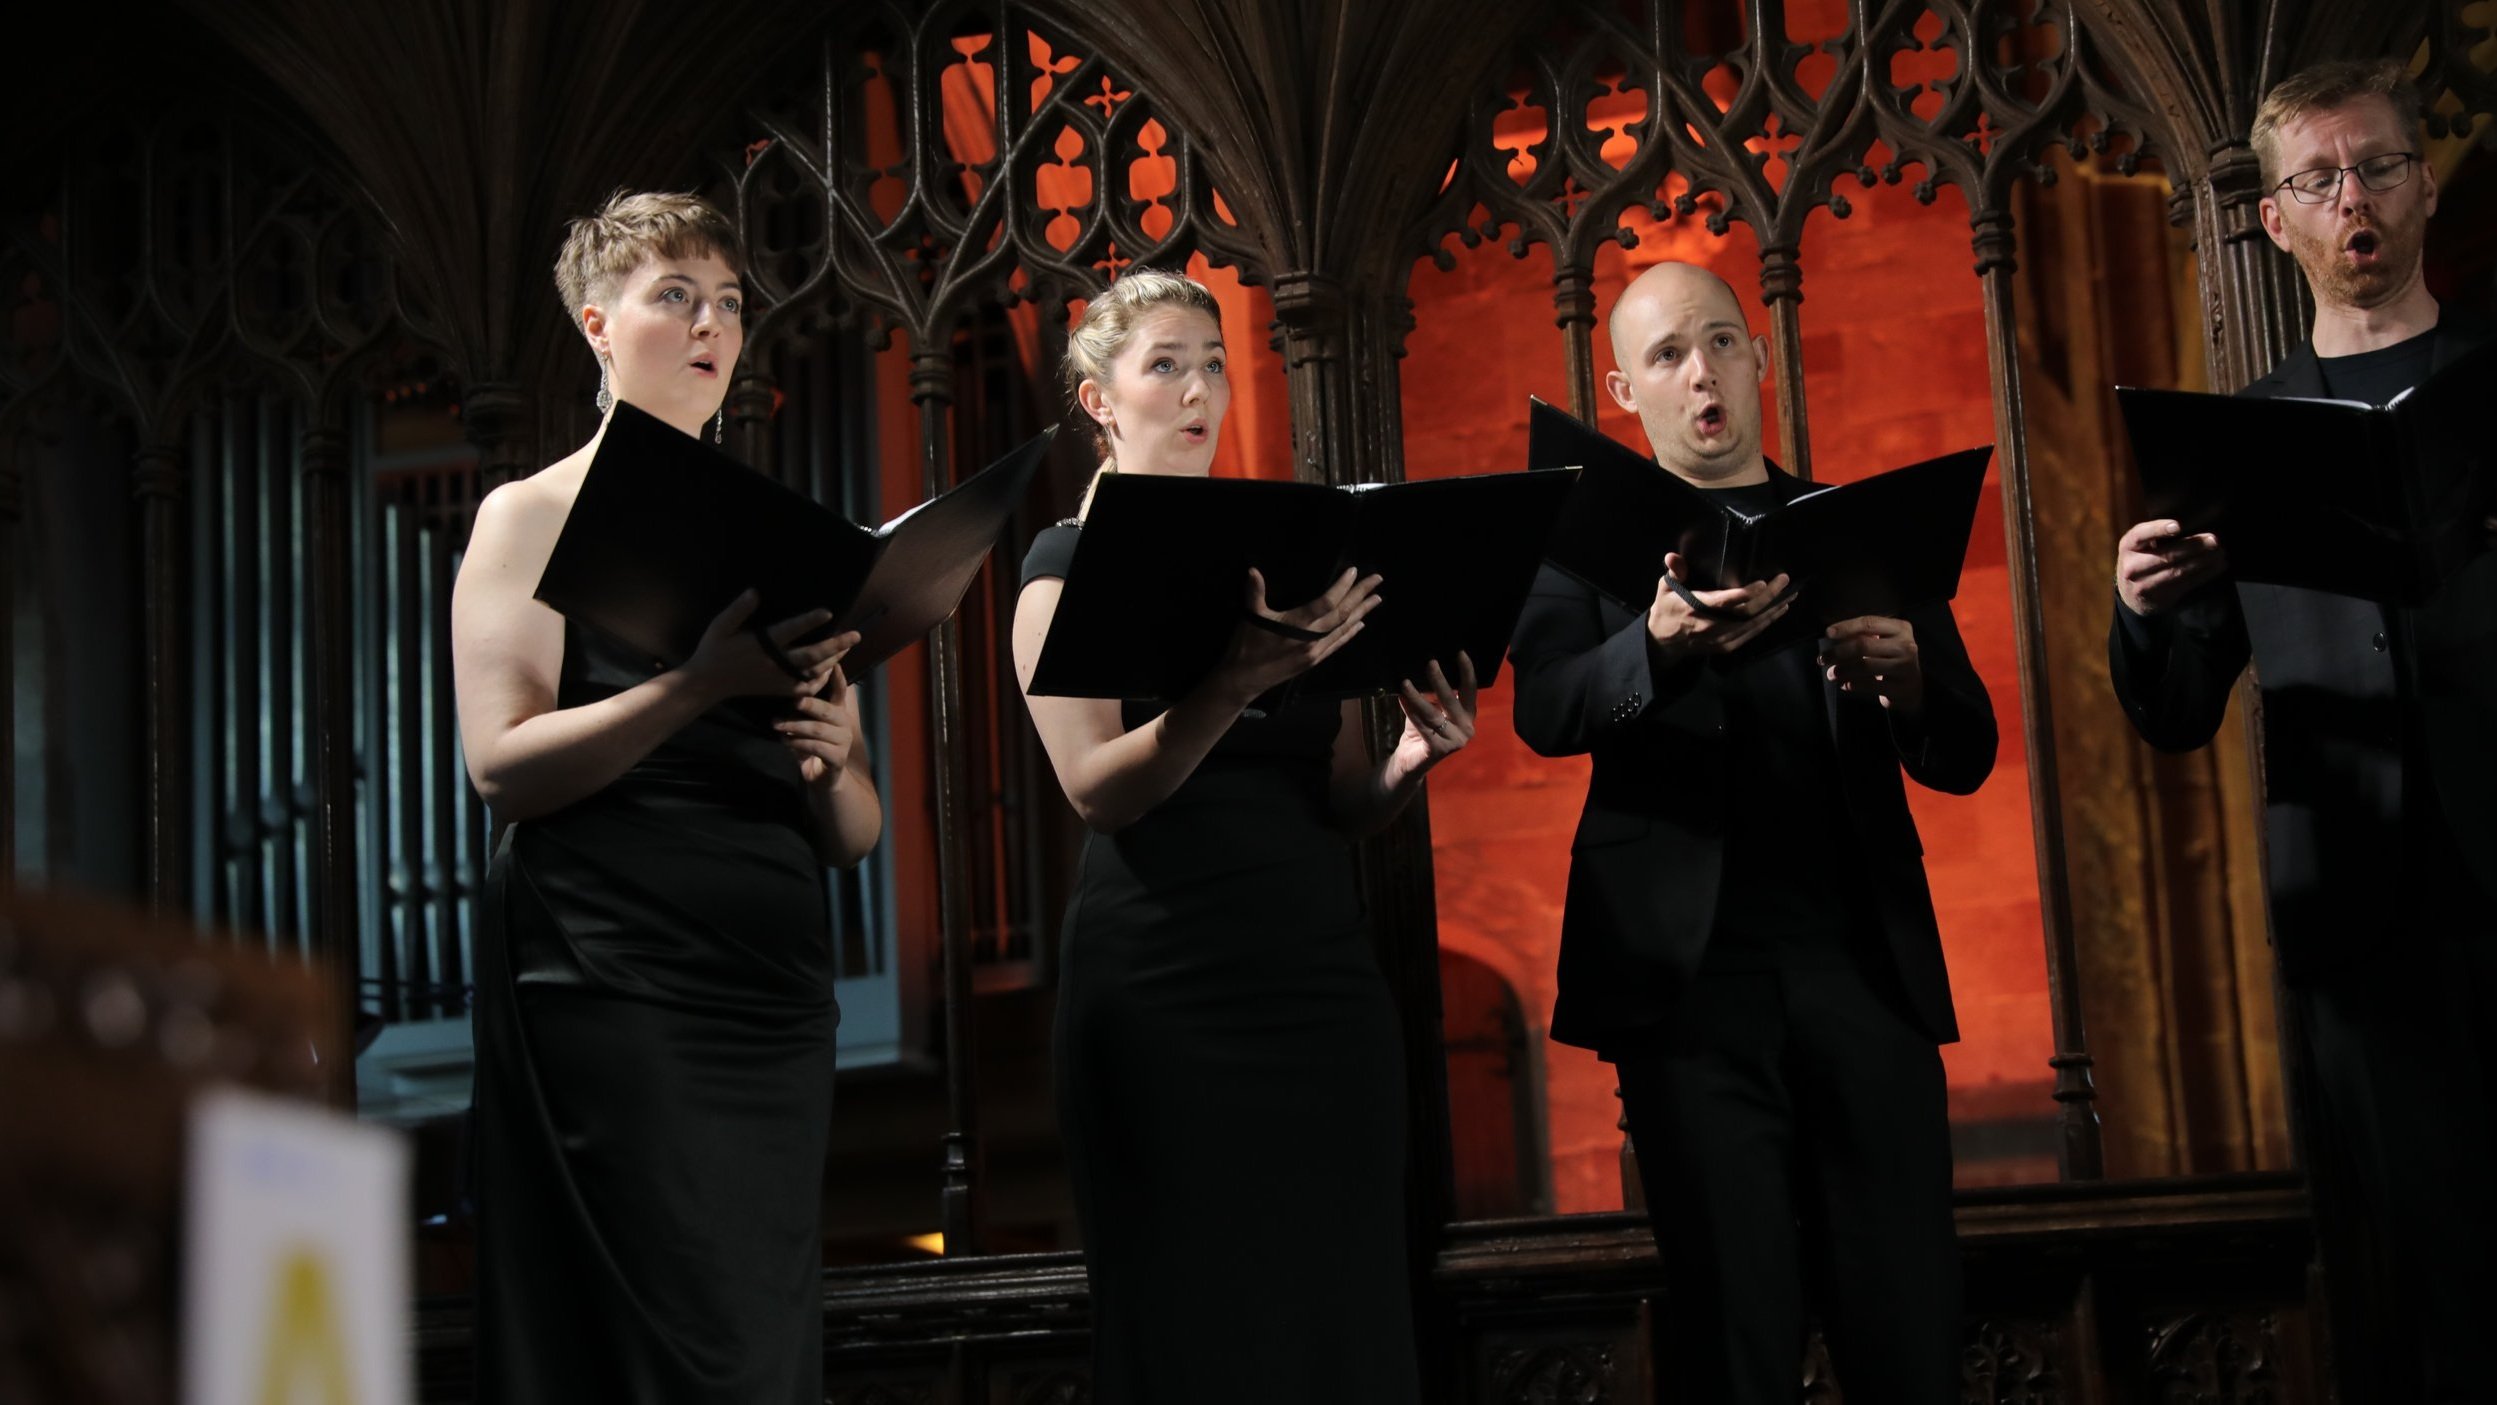 About — The Marian Consort